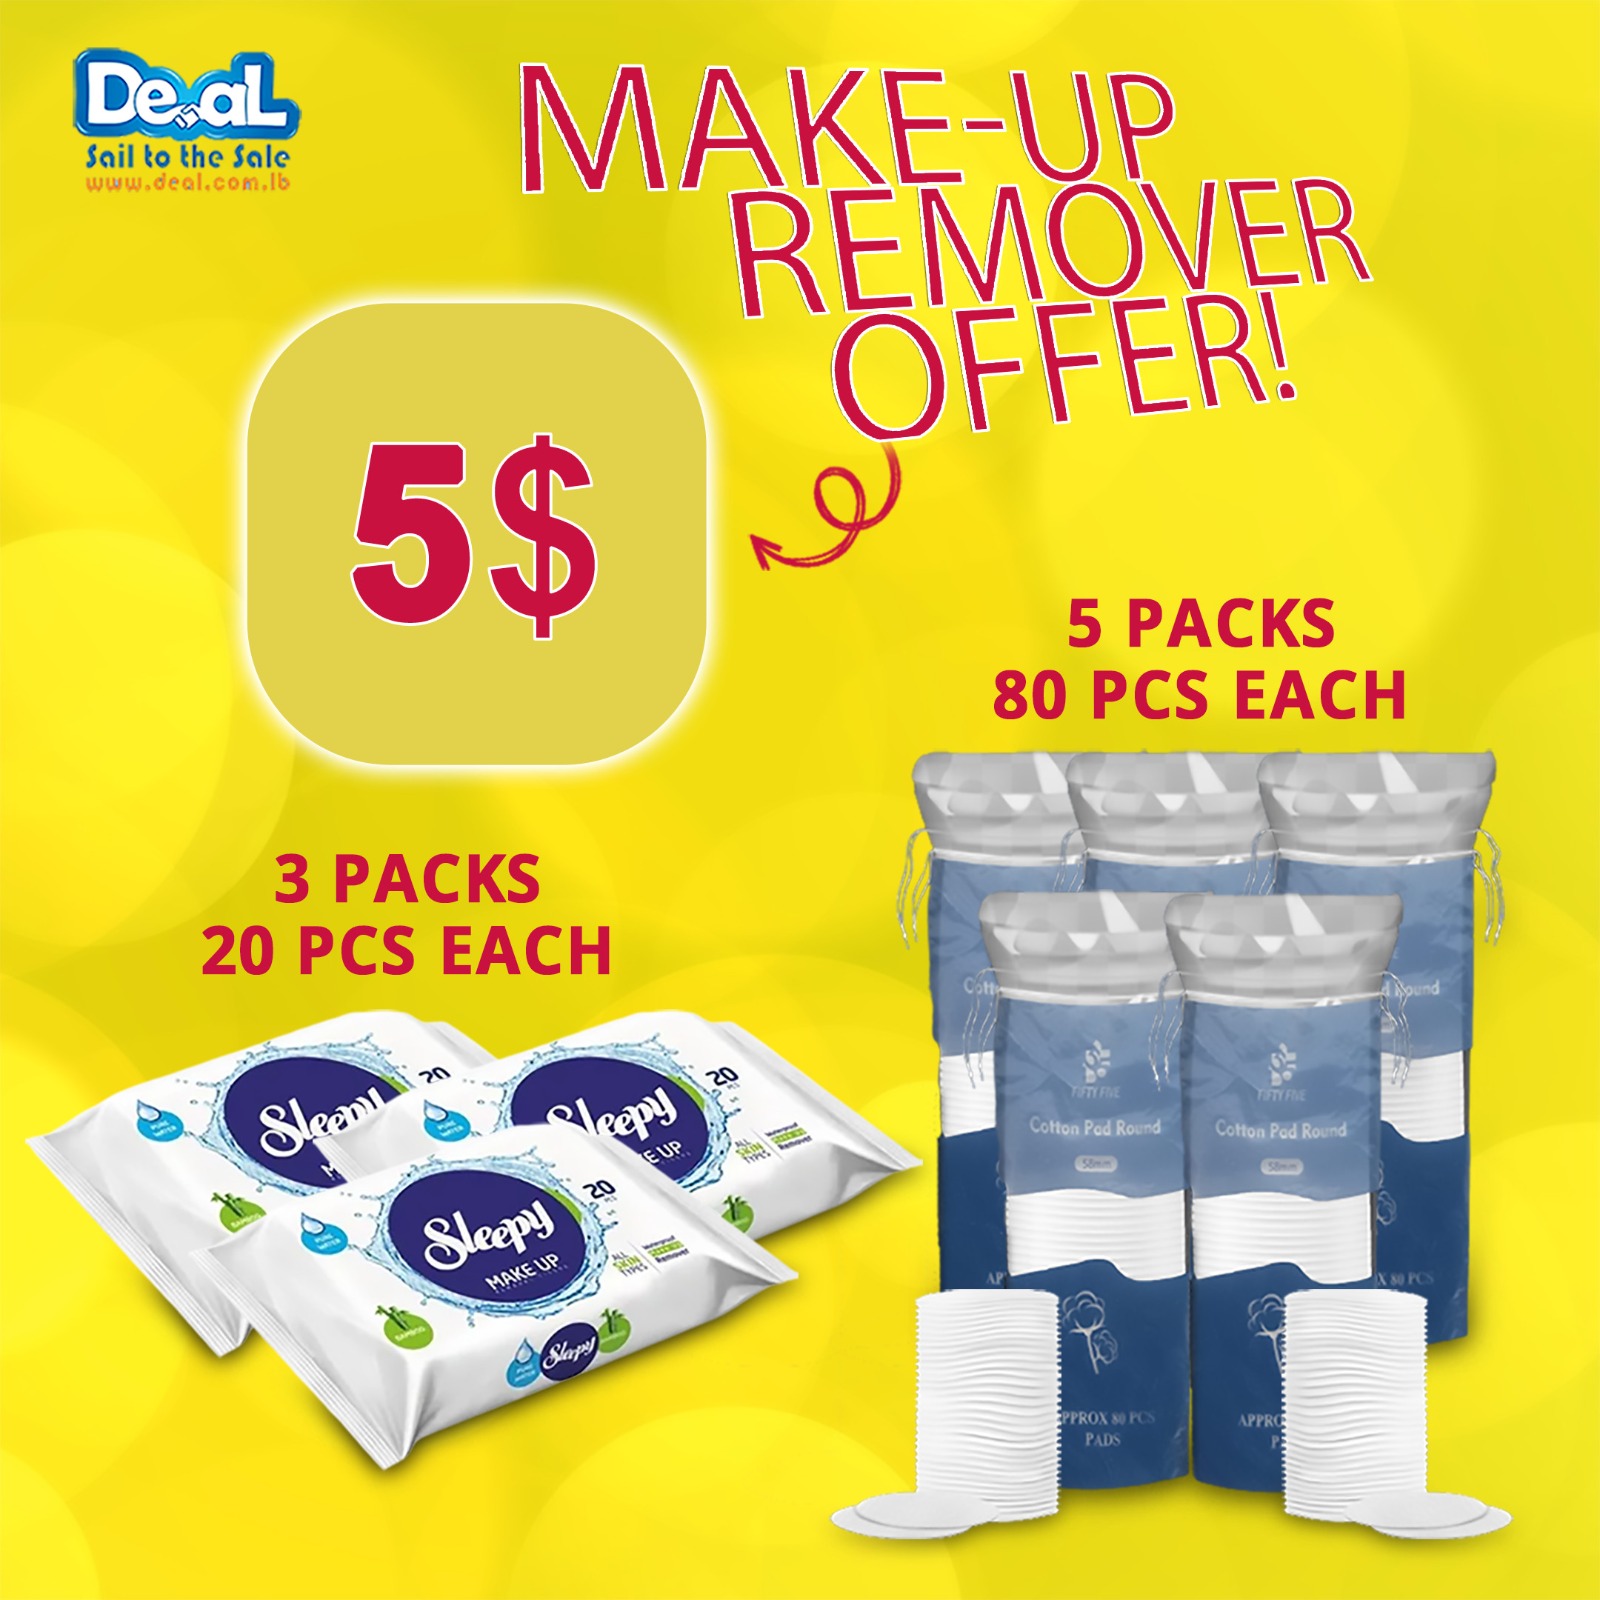 Makeup+Remover+Offer+of+3Packs+Of+Wipes+20+Pcs+Each+and+5+Packs+Of+Cotton+Pad+80Pcs+Each